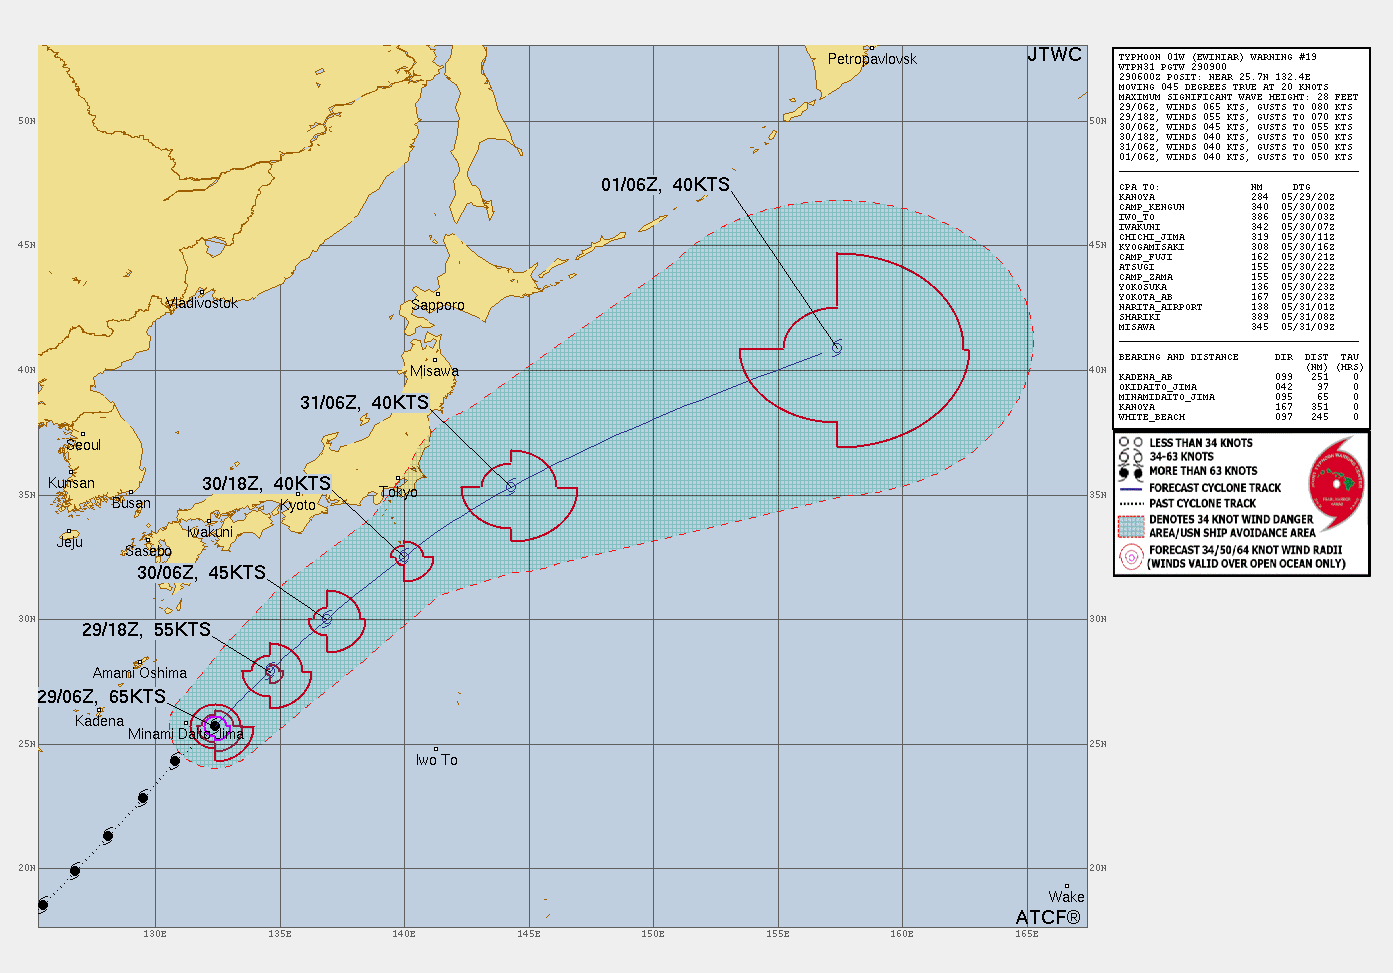 FORECAST REASONING.  SIGNIFICANT FORECAST CHANGES: THERE ARE NO SIGNIFICANT CHANGES TO THE FORECAST FROM THE PREVIOUS WARNING.  FORECAST DISCUSSION: TY 01W IS FORECASTED TO CONTINUE TO TRACK NORTHEASTWARD AROUND THE WESTERN AND NORTHWESTERN PERIPHERY OF THE DEEP-LAYER SUBTROPICAL STEERING RIDGE THROUGH TAU 72 OF THE FORECAST. THE TYPHOON IS EXPECTED TO BEGIN ENTERING A GENERALLY NON-CONDUCIVE ENVIRONMENT FOR FURTHER INTENSIFICATION AS MODERATE TO STRONG VWS (20-30 KTS) WILL INCREASE THROUGHOUT THE NEXT 12 HOURS. ALTHOUGH SEA SURFACE TEMPERATURES REMAIN WARM (26-28 C) AND UPPER-LEVEL OUTFLOW IS SUPPORTIVE OF FURTHER DEEPENING IN THE PHILIPPINE SEA, THE INFLUENCE FROM THE MID-LATITUDE WESTERLIES WITH STRONG VWS WILL CAUSE CONTINUED WEAKENING UNTIL EXTRATROPICAL TRANSITION TO AN ASYMMETRIC COLD-CORE BAROCLINIC LOW. AS TY 01W CONTINUES TO TRACK NORTHEASTWARD BETWEEN TAU 12 AND TAU 18, COOL SEA SURFACE TEMPERATURES (25-27 C) WILL AID IN THE STEADY WEAKENING OF THE SYSTEM. INTO TAU 36, THE TYPHOON WILL BEGIN UNDERGOING EXTRATROPICAL TRANSITION AS DRY AIR ENTRAINS INTO THE CORE STRUCTURE, AND COLD-AIR ADVECTION AMPLIFIES FROM THE NORTHWEST AND LASTS THROUGH THE REMAINDER OF THE 72 HOUR FORECAST.